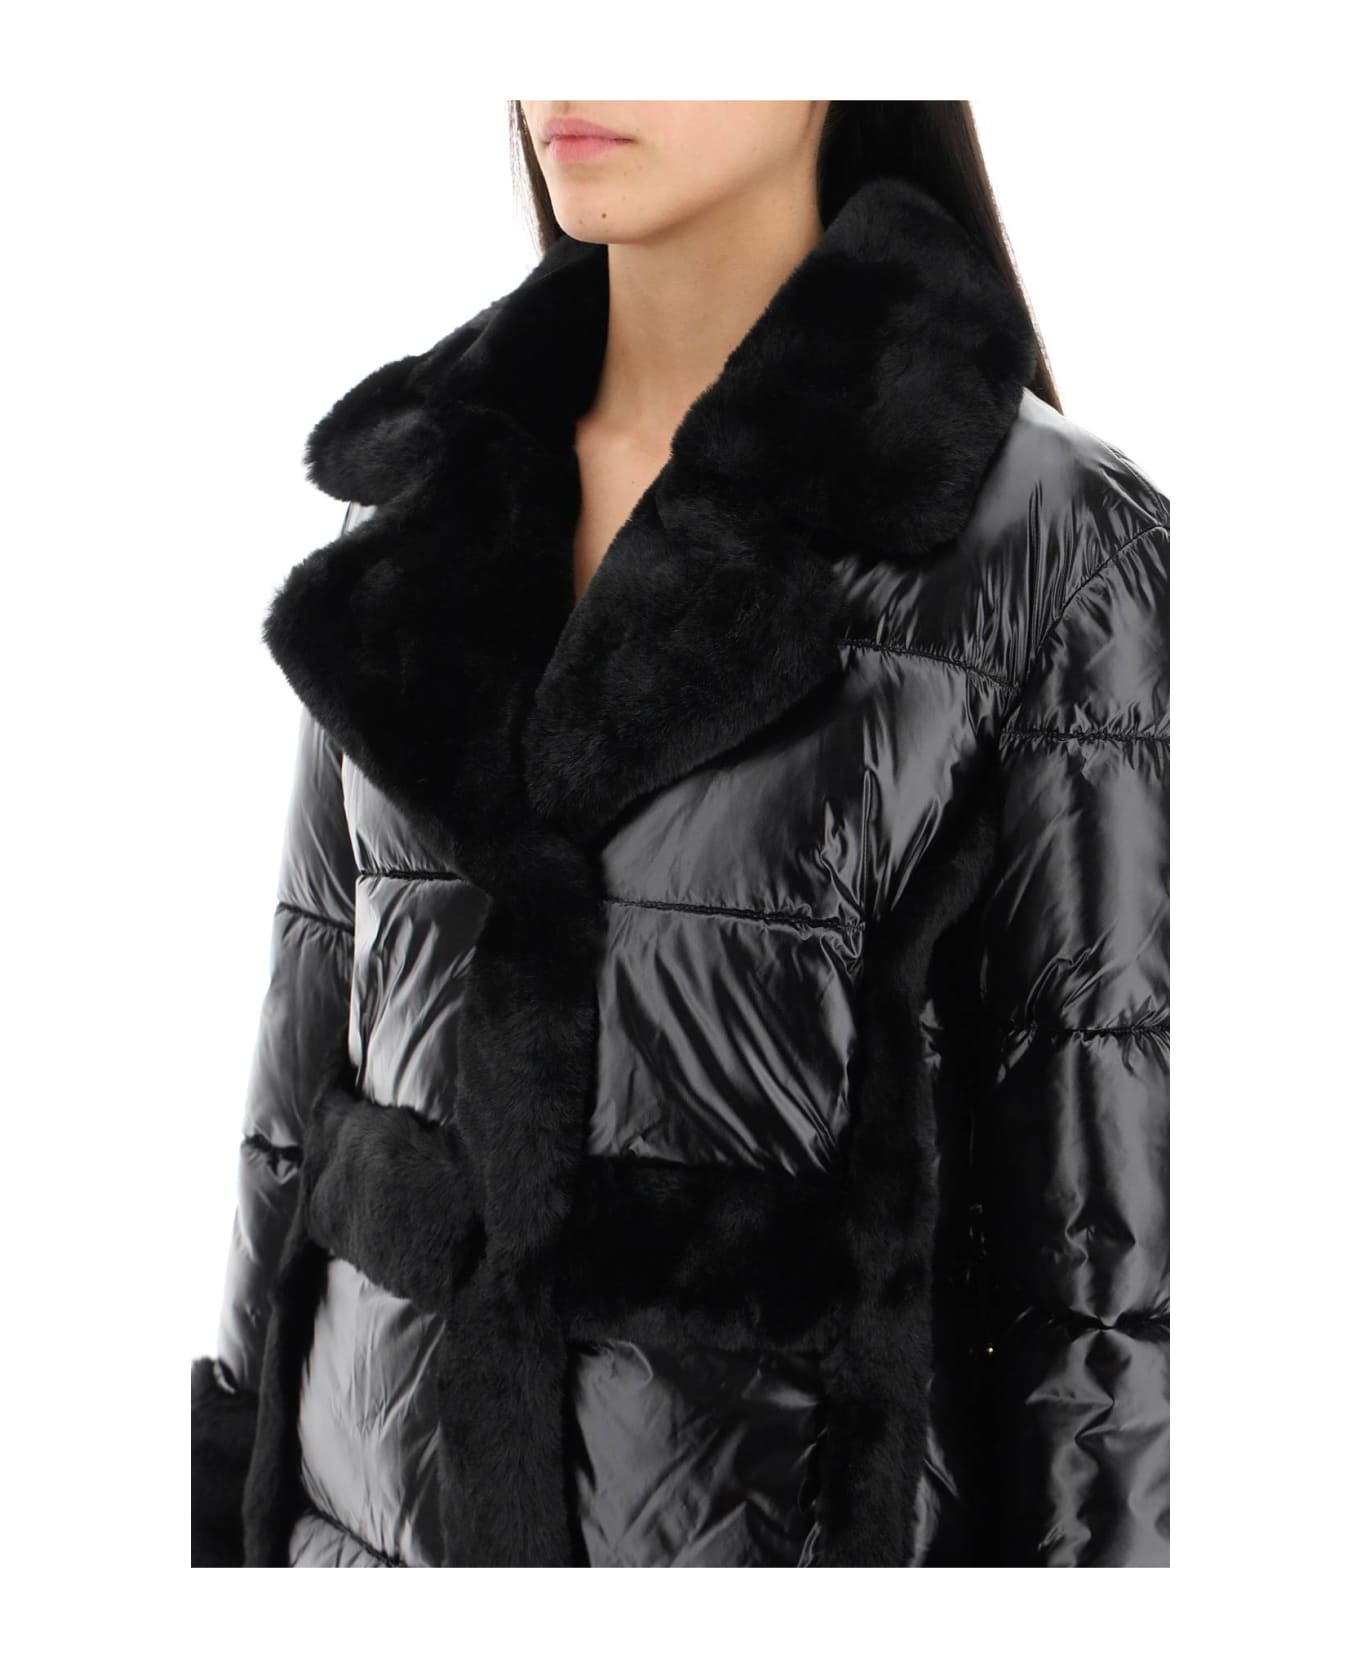 Guess by Marciano Puffer Jacket With Faux Fur Details - JET BLACK A996 (Black)